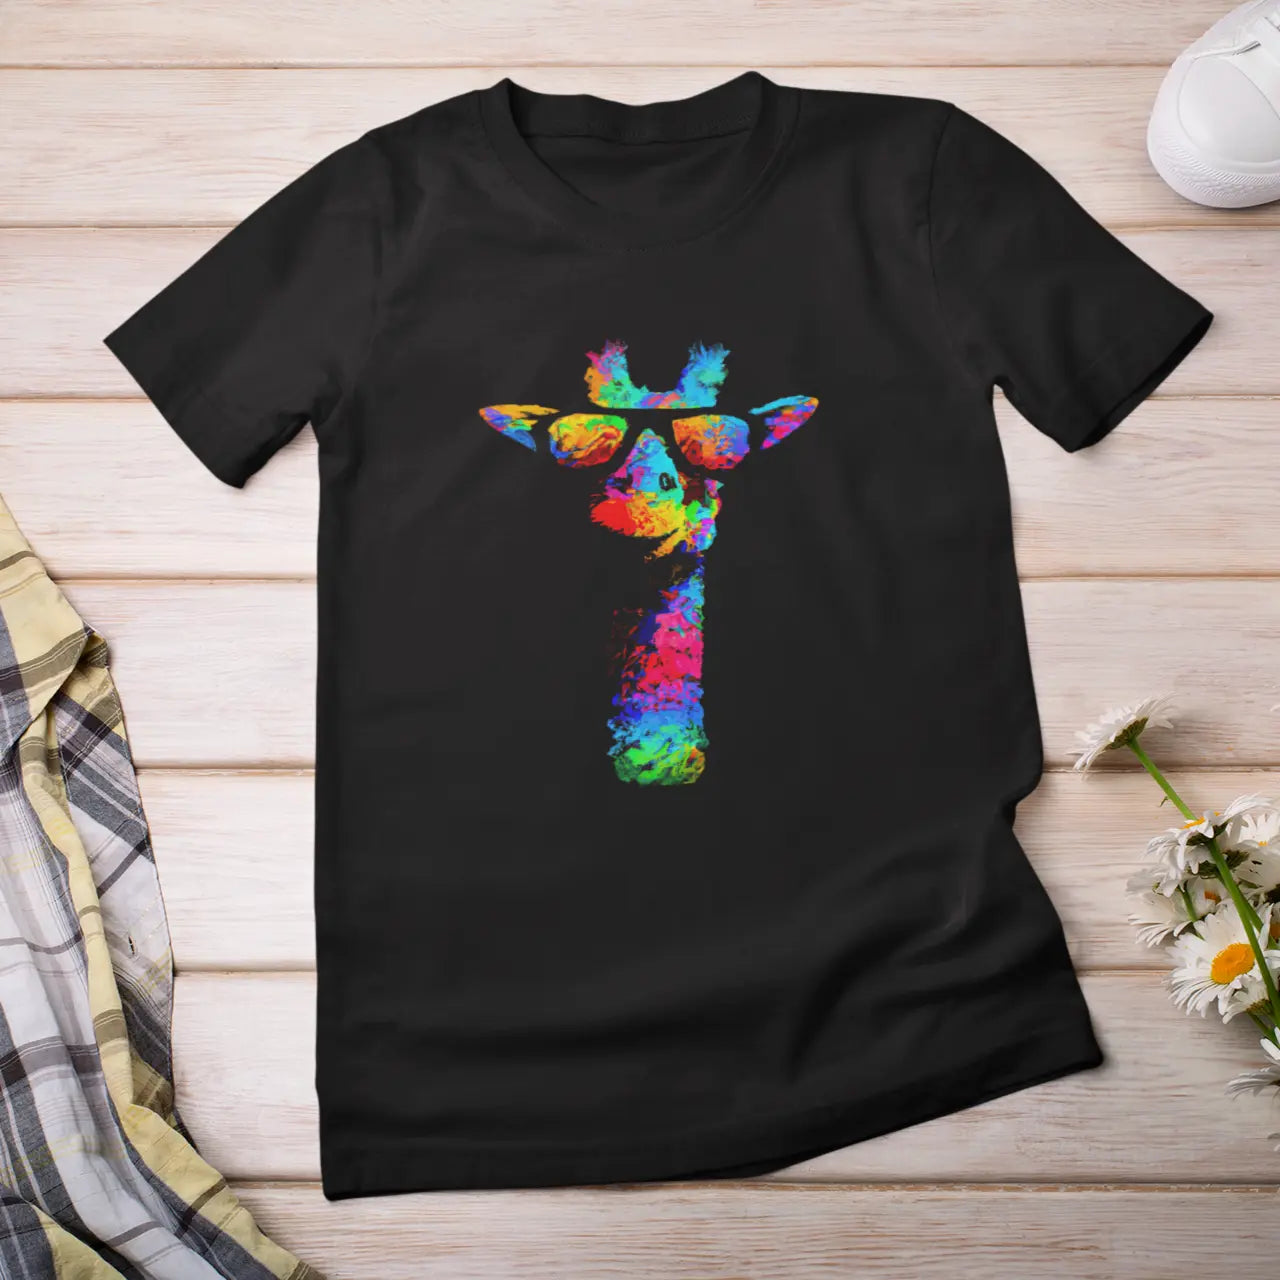 psychedelicBRANDz's Kaleidoscope Neckstretch featuring a colorful giraffe on a black shirt